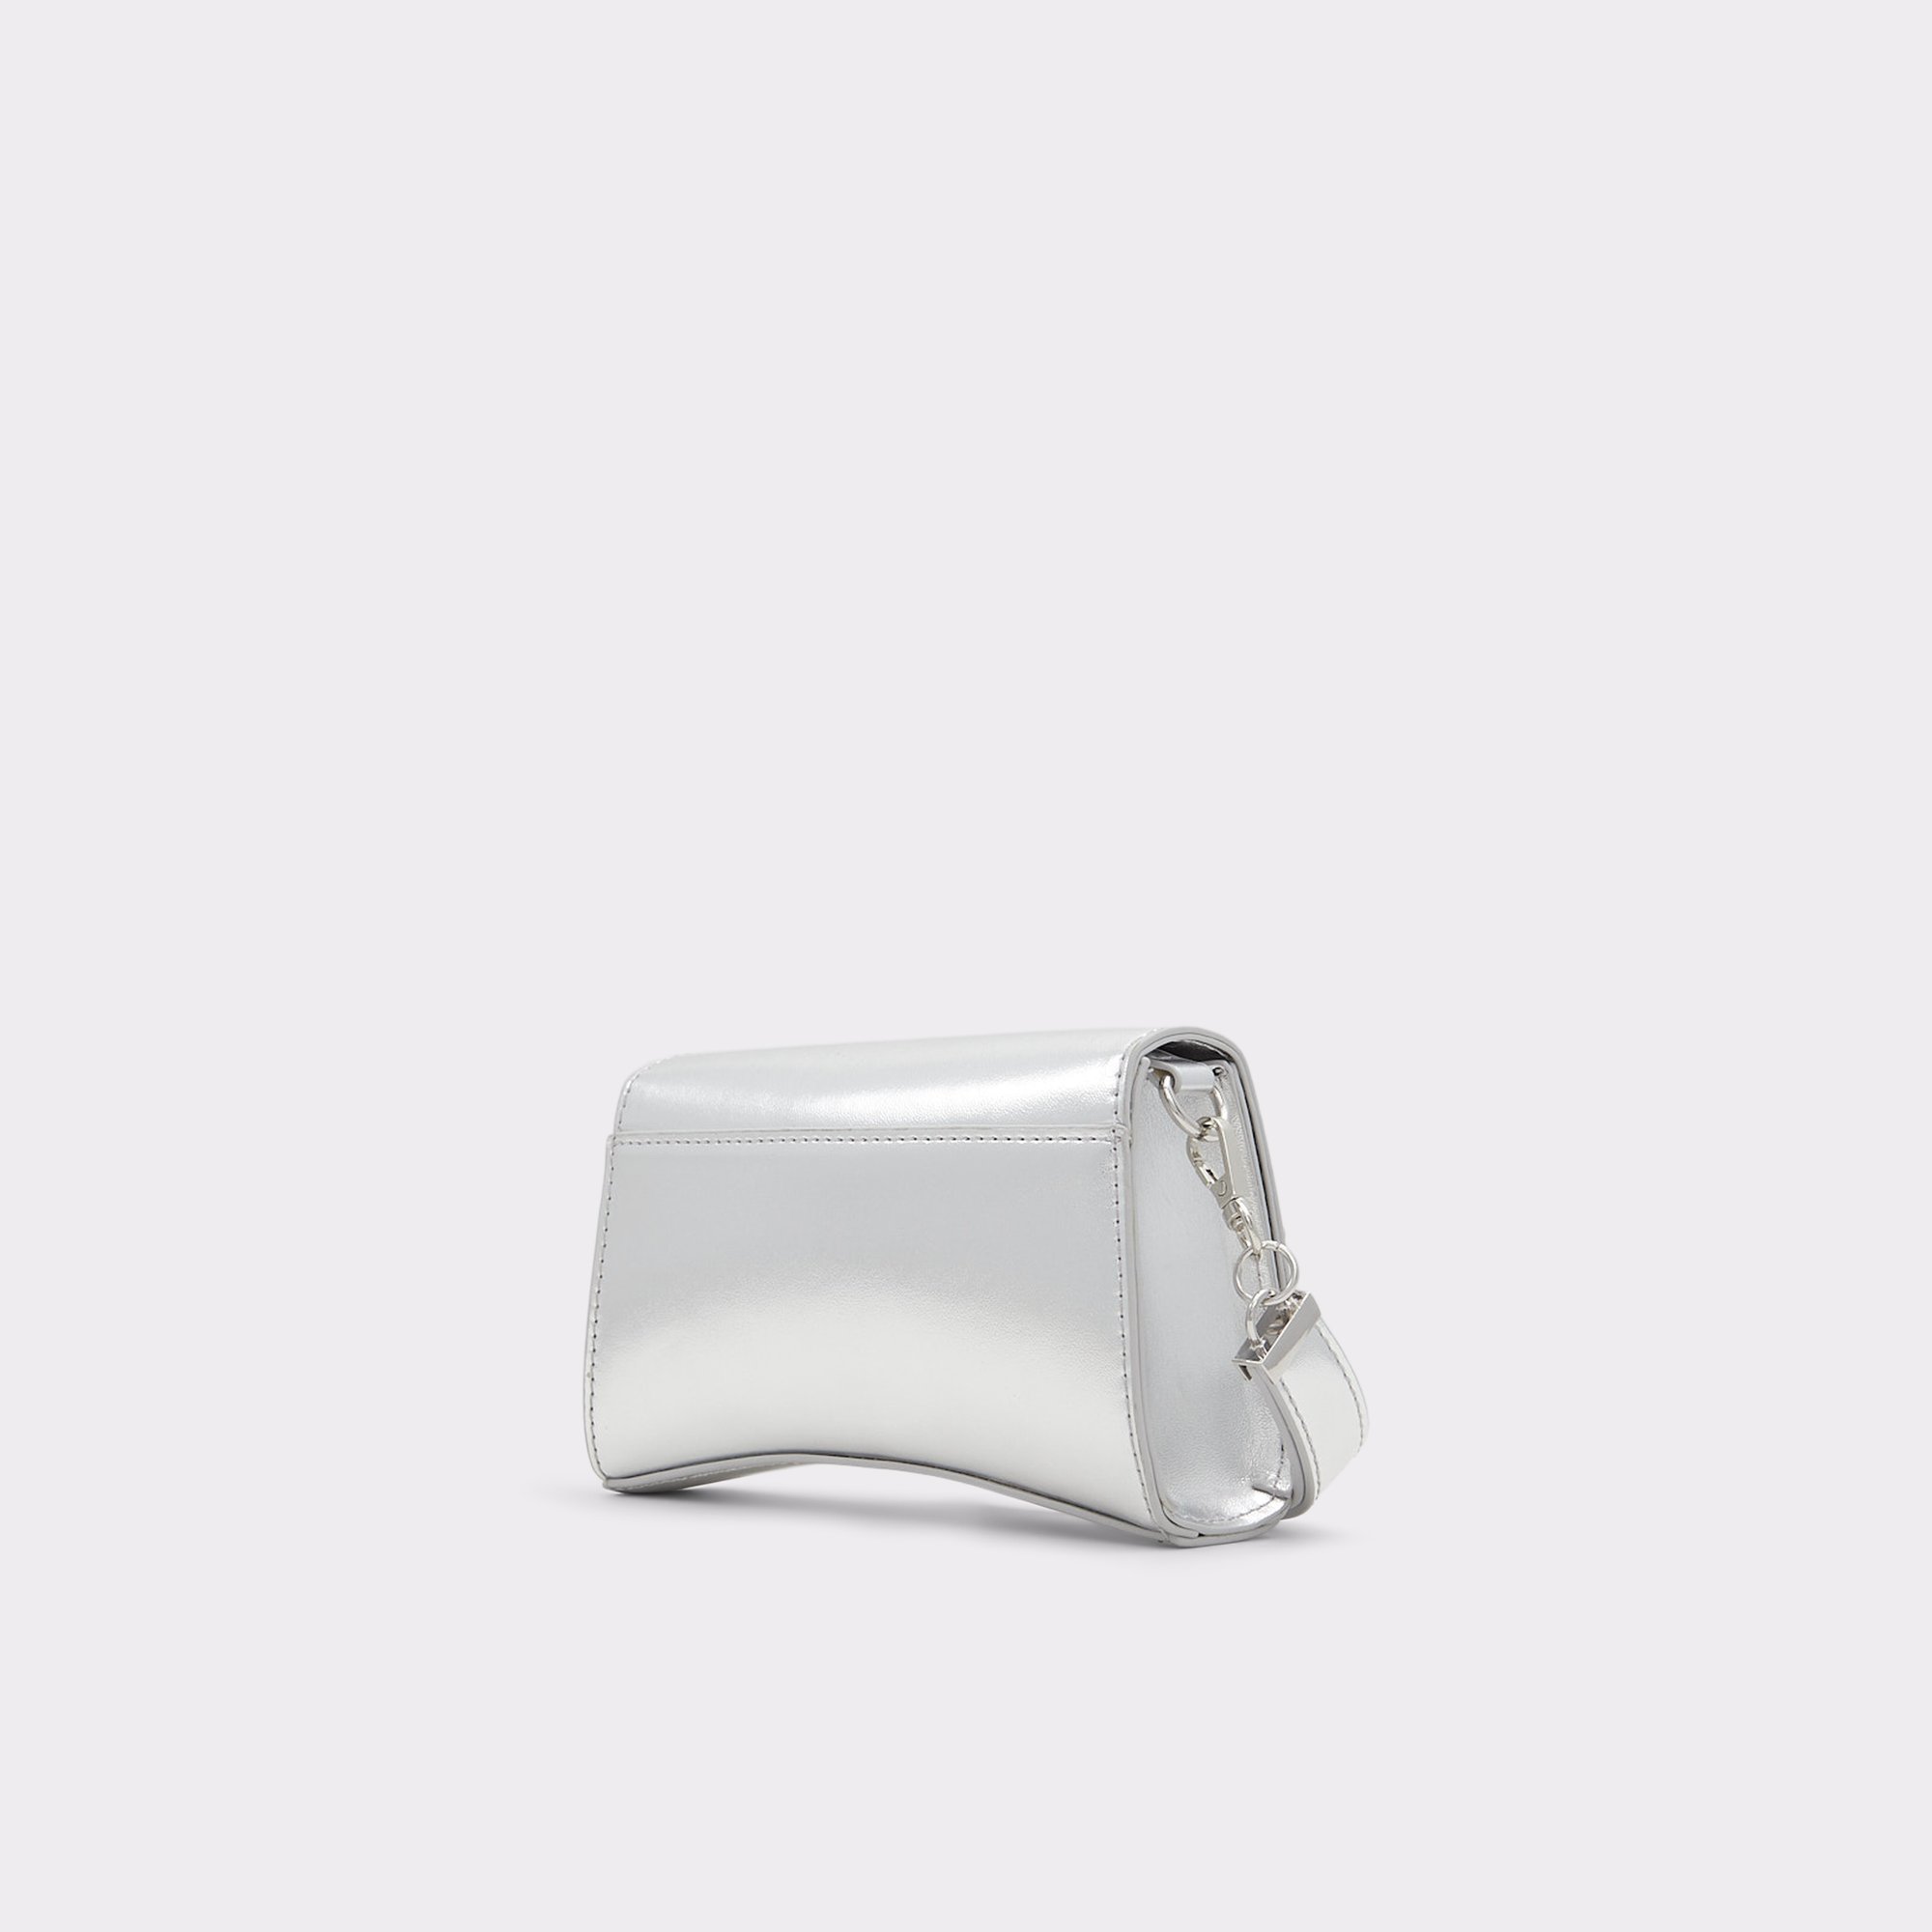 Buy Aldo CLEEO040 Silver Solid Clutch Online At Best Price @ Tata CLiQ